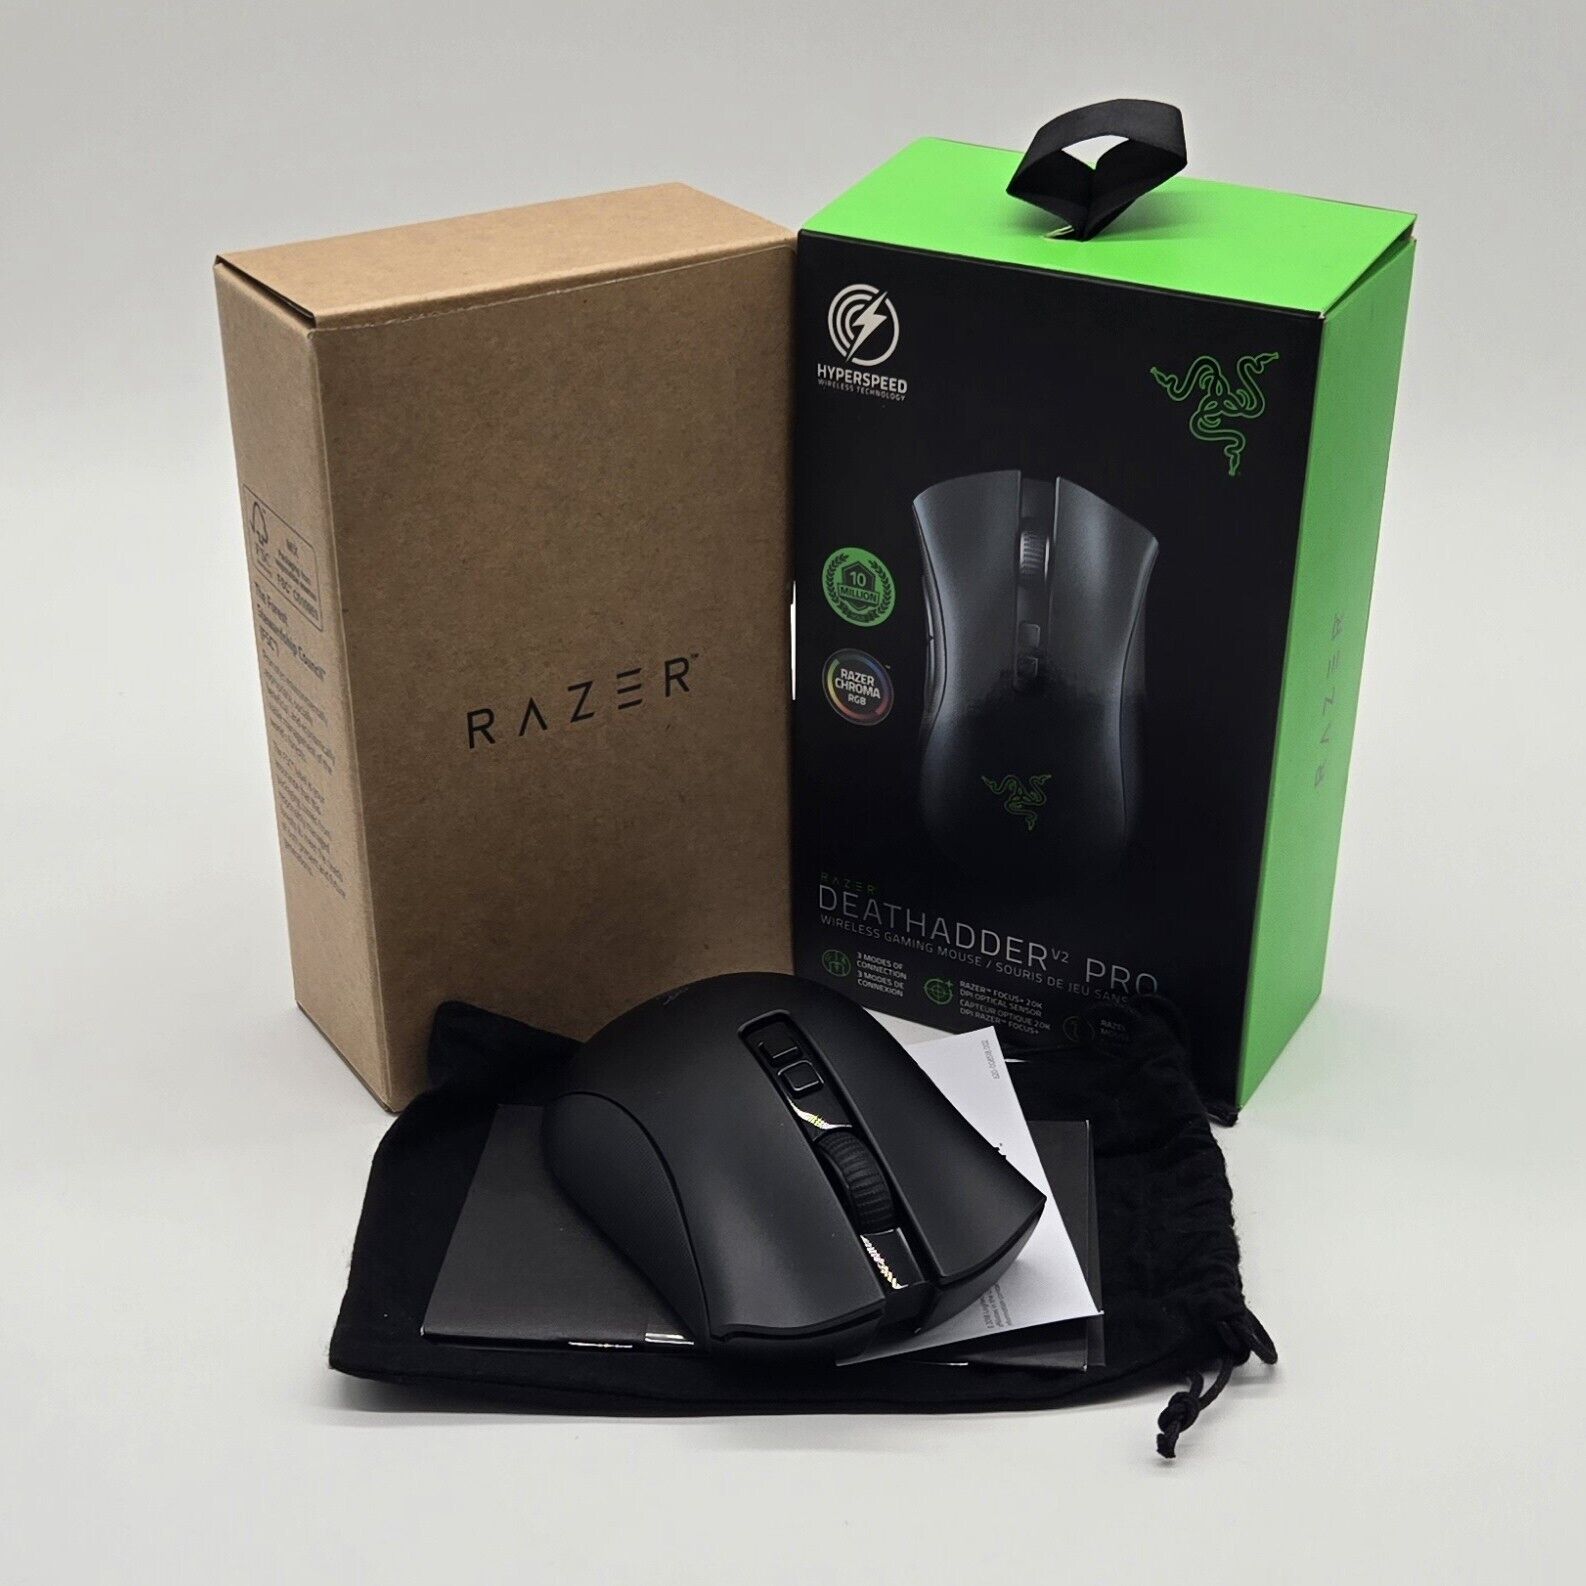 Razer DeathAdder V2 Pro Wireless Gaming Mouse Hyperspeed High Accuracy “No Cord”